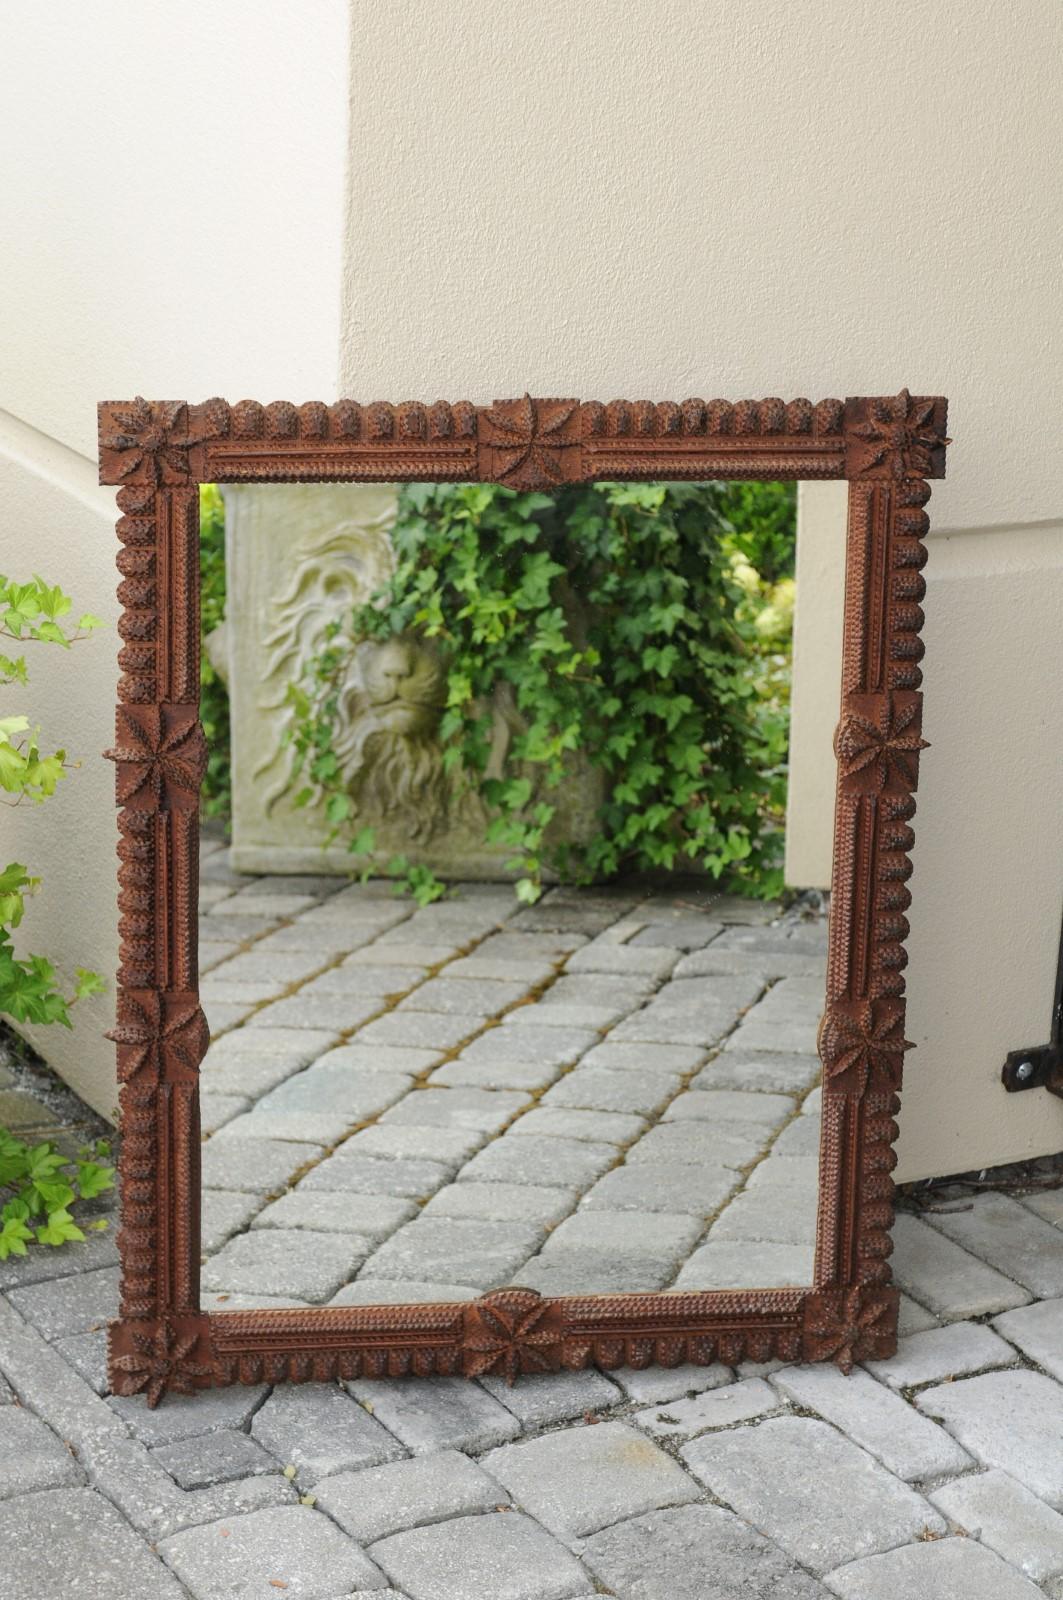 A French hand carved Tramp Art wall mirror from the early 20th century, with star motifs. Born in France during the turn of the century, this handsome wooden mirror presents the stylistic characteristics typical of the Tramp Art style. A simple,